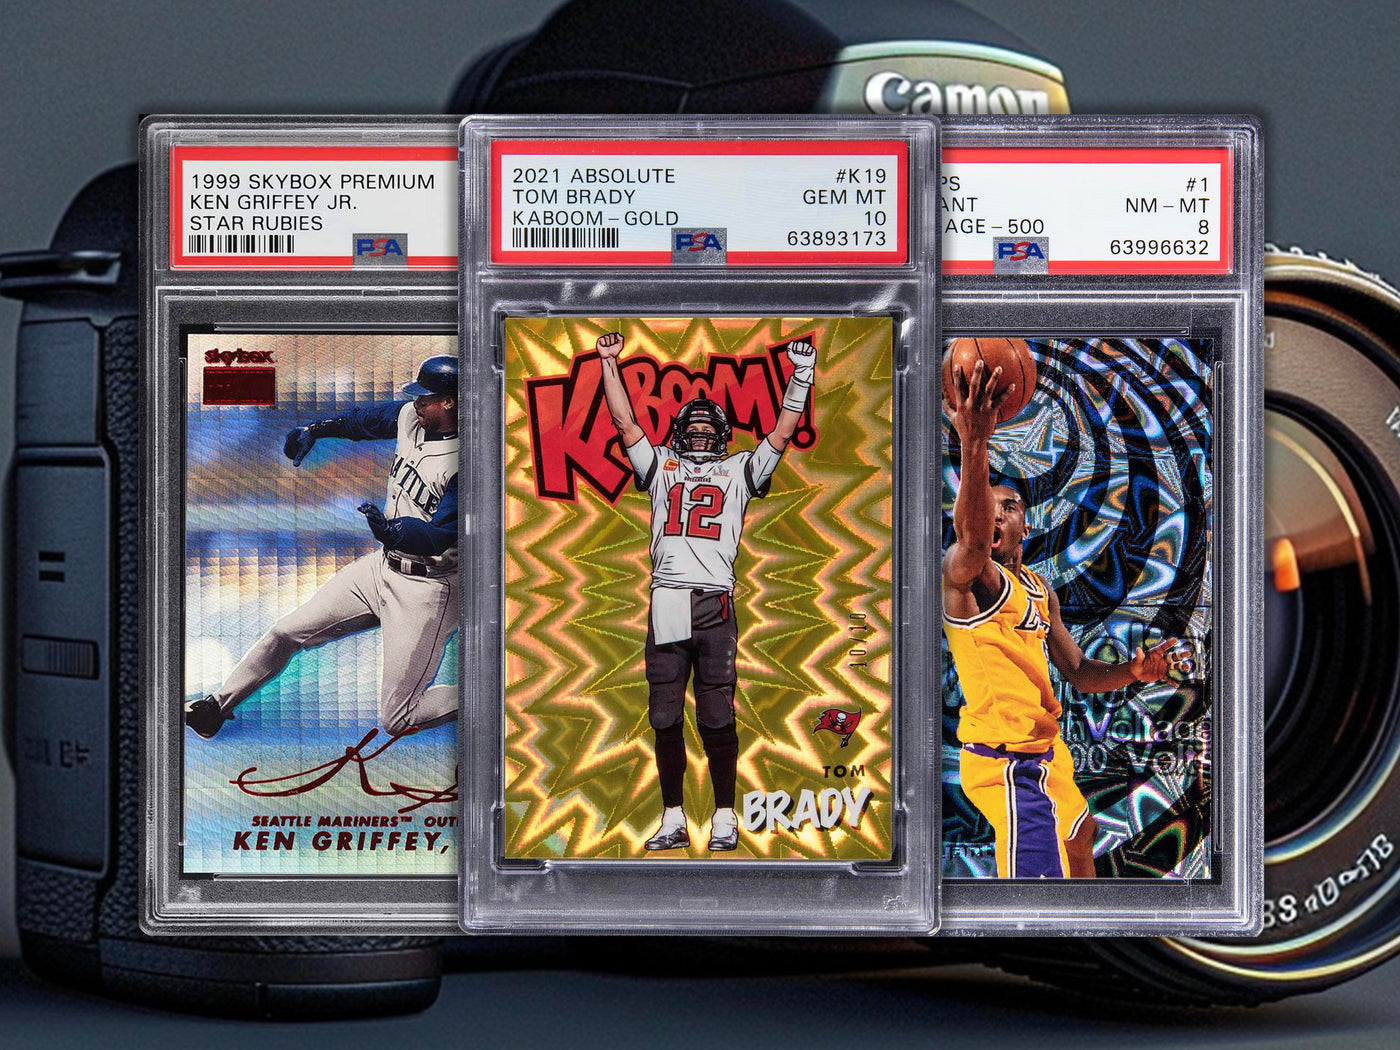 Image featuring three PSA slabs: a Tom Brady Gold Kaboom, Ken Griffey Jr. Star Rubies, and Kobe Bryant High Voltage 500, with a camera-themed background